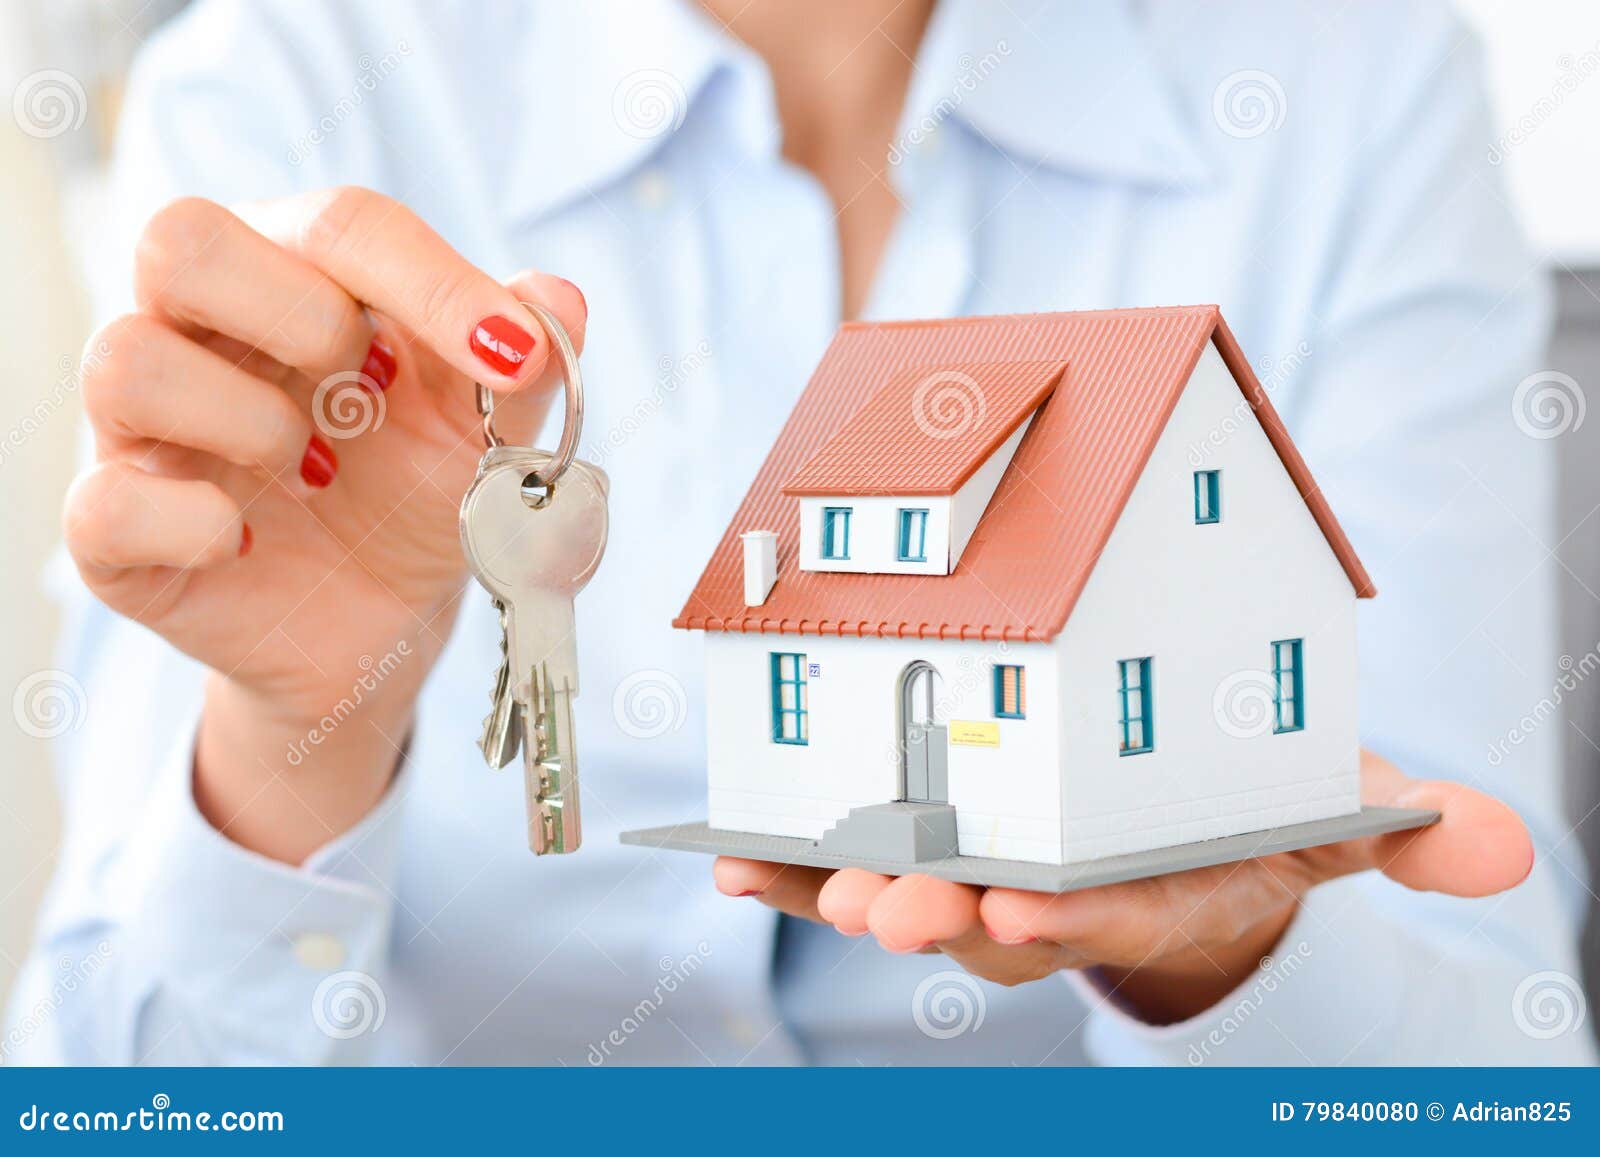 buying a house concept with woman hands holding a model house and keys